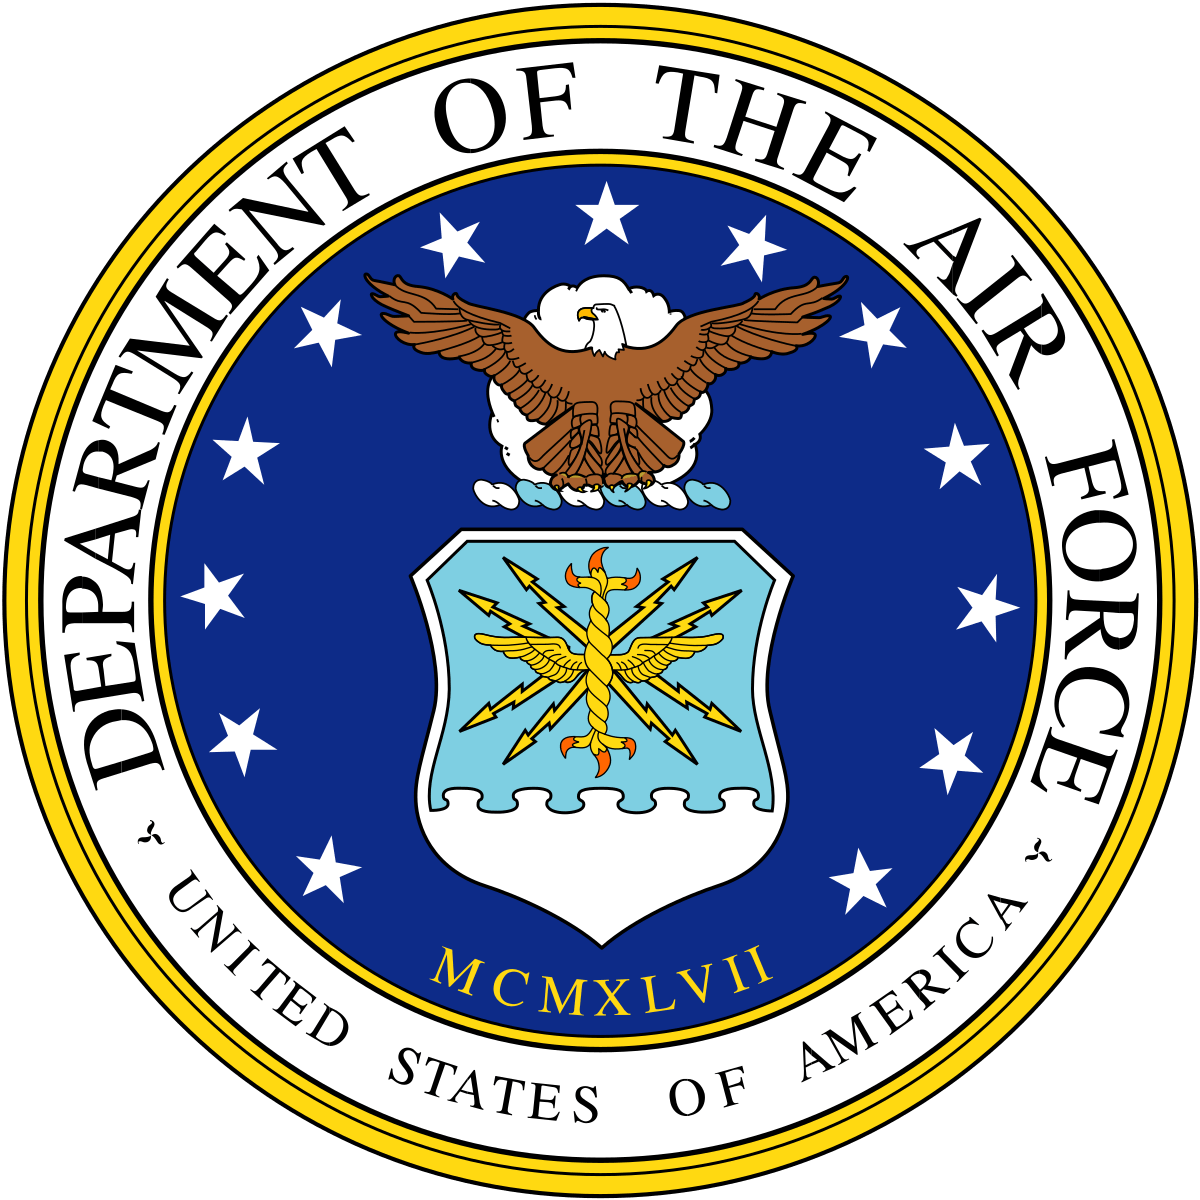 The Department of Air Force Logo - United States Department of the Air Force